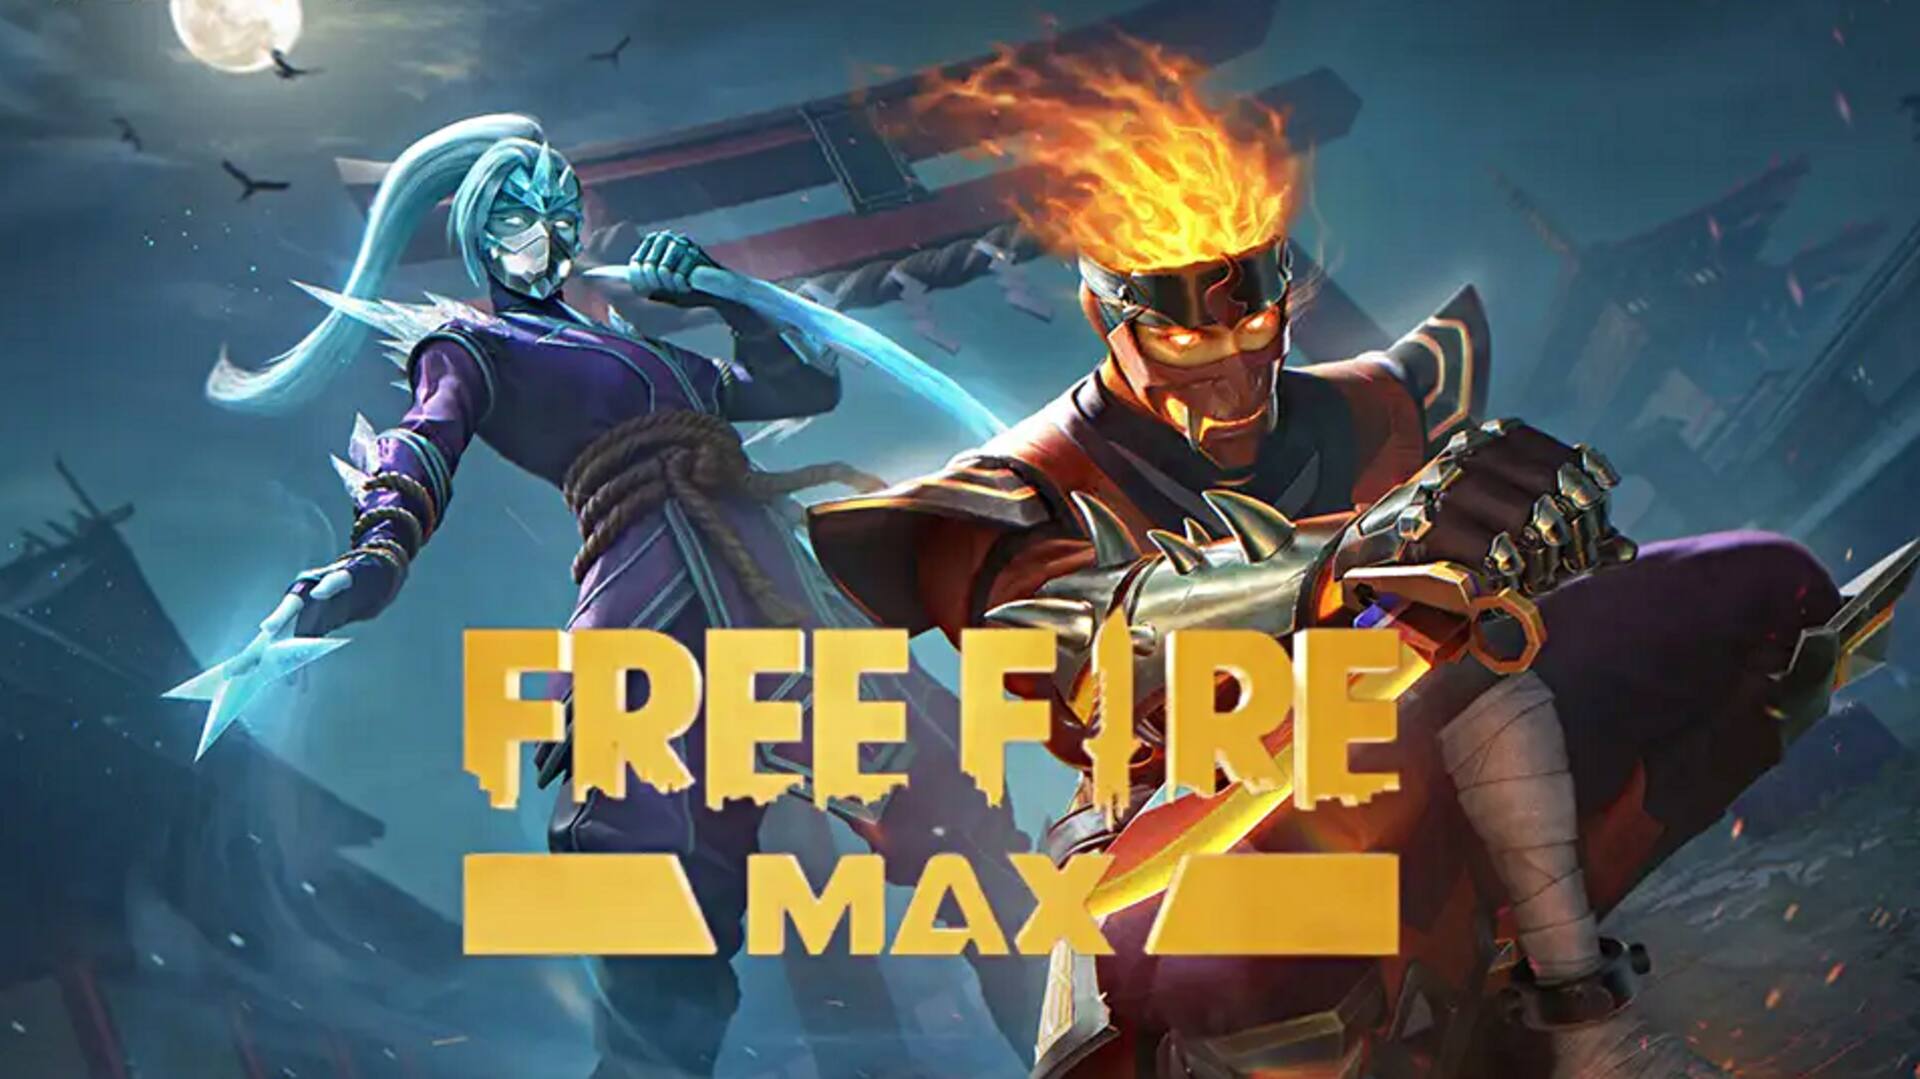 Garena Free Fire MAX redeem codes for October 17